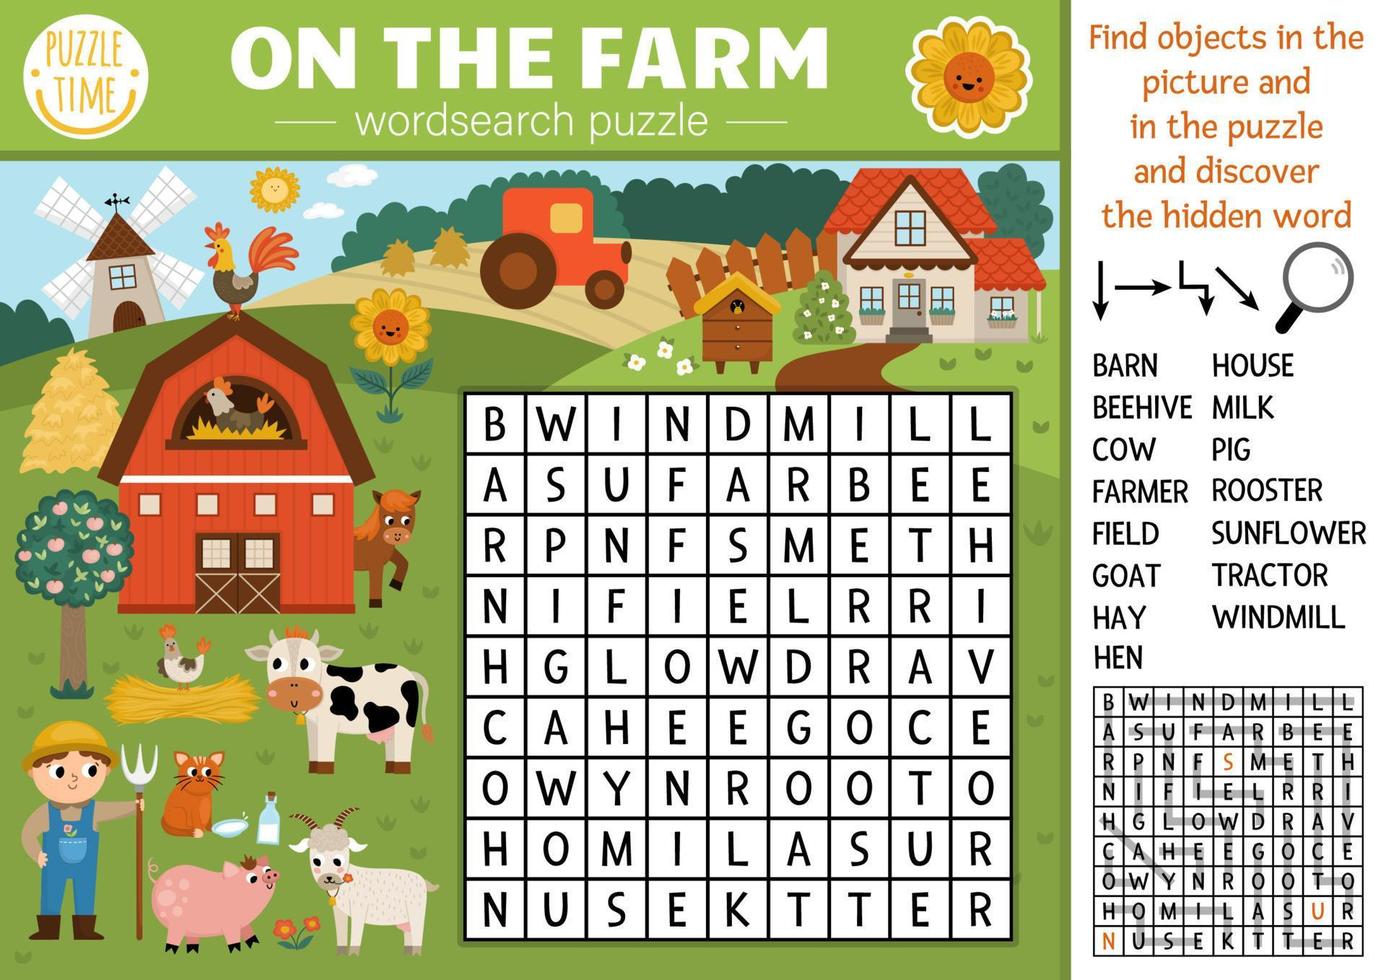 Vector on the farm wordsearch puzzle for kids. Simple farm word search quiz with rural country landscape. Educational activity with cow, farmer, barn. Cross word with village scene